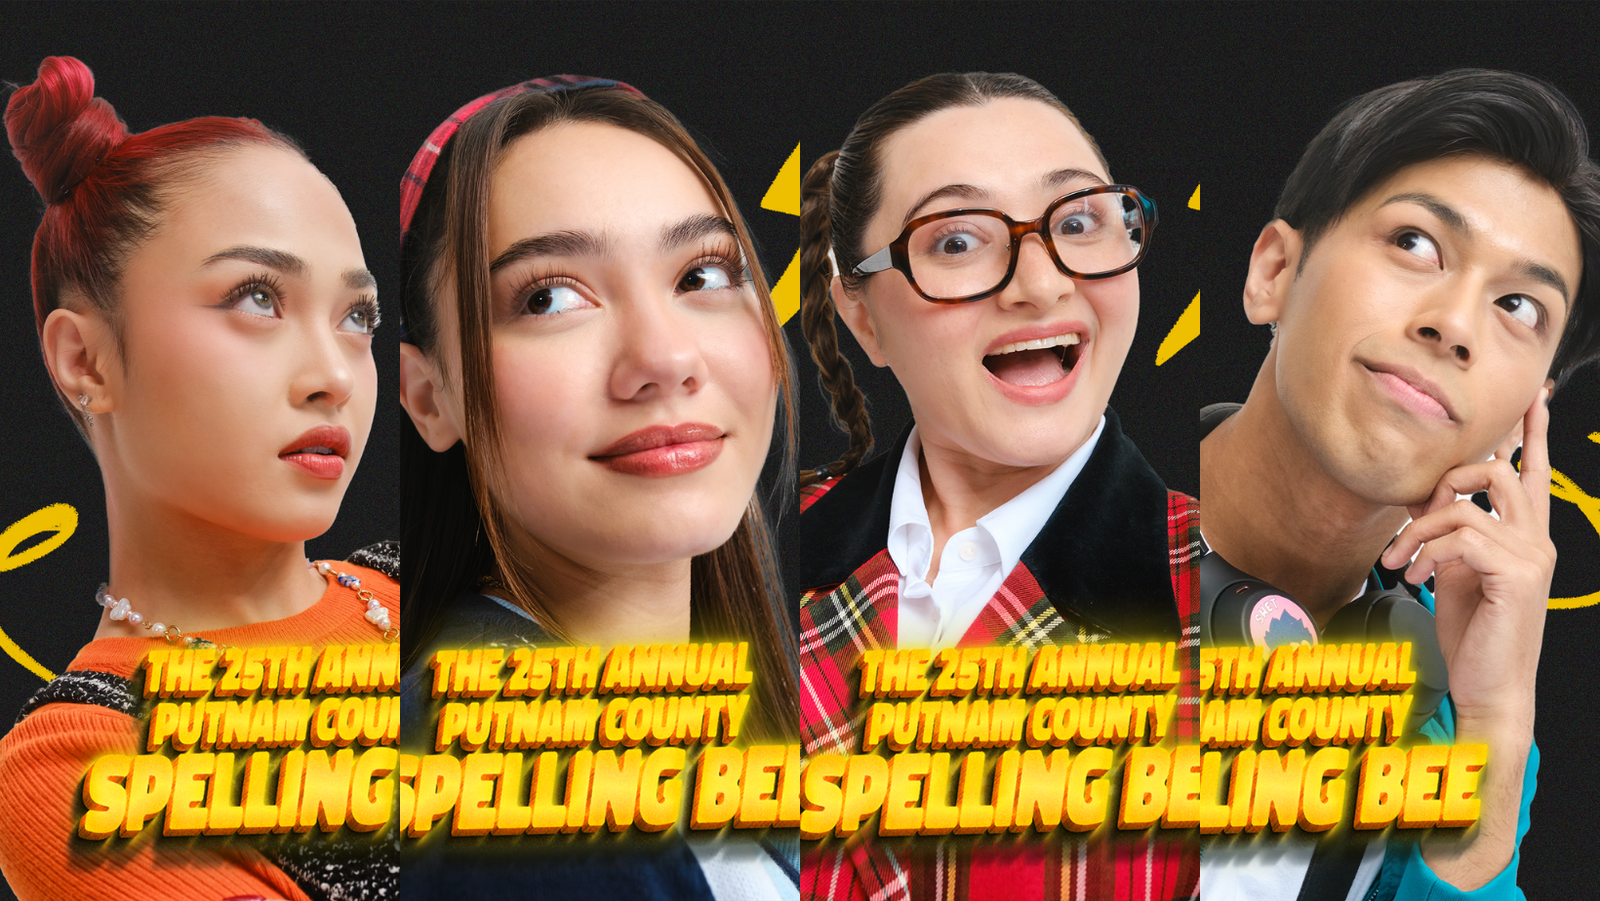 “The 25th Annual Putnam County Spelling Bee” Is a Must-Watch Interactive Musical Comedy